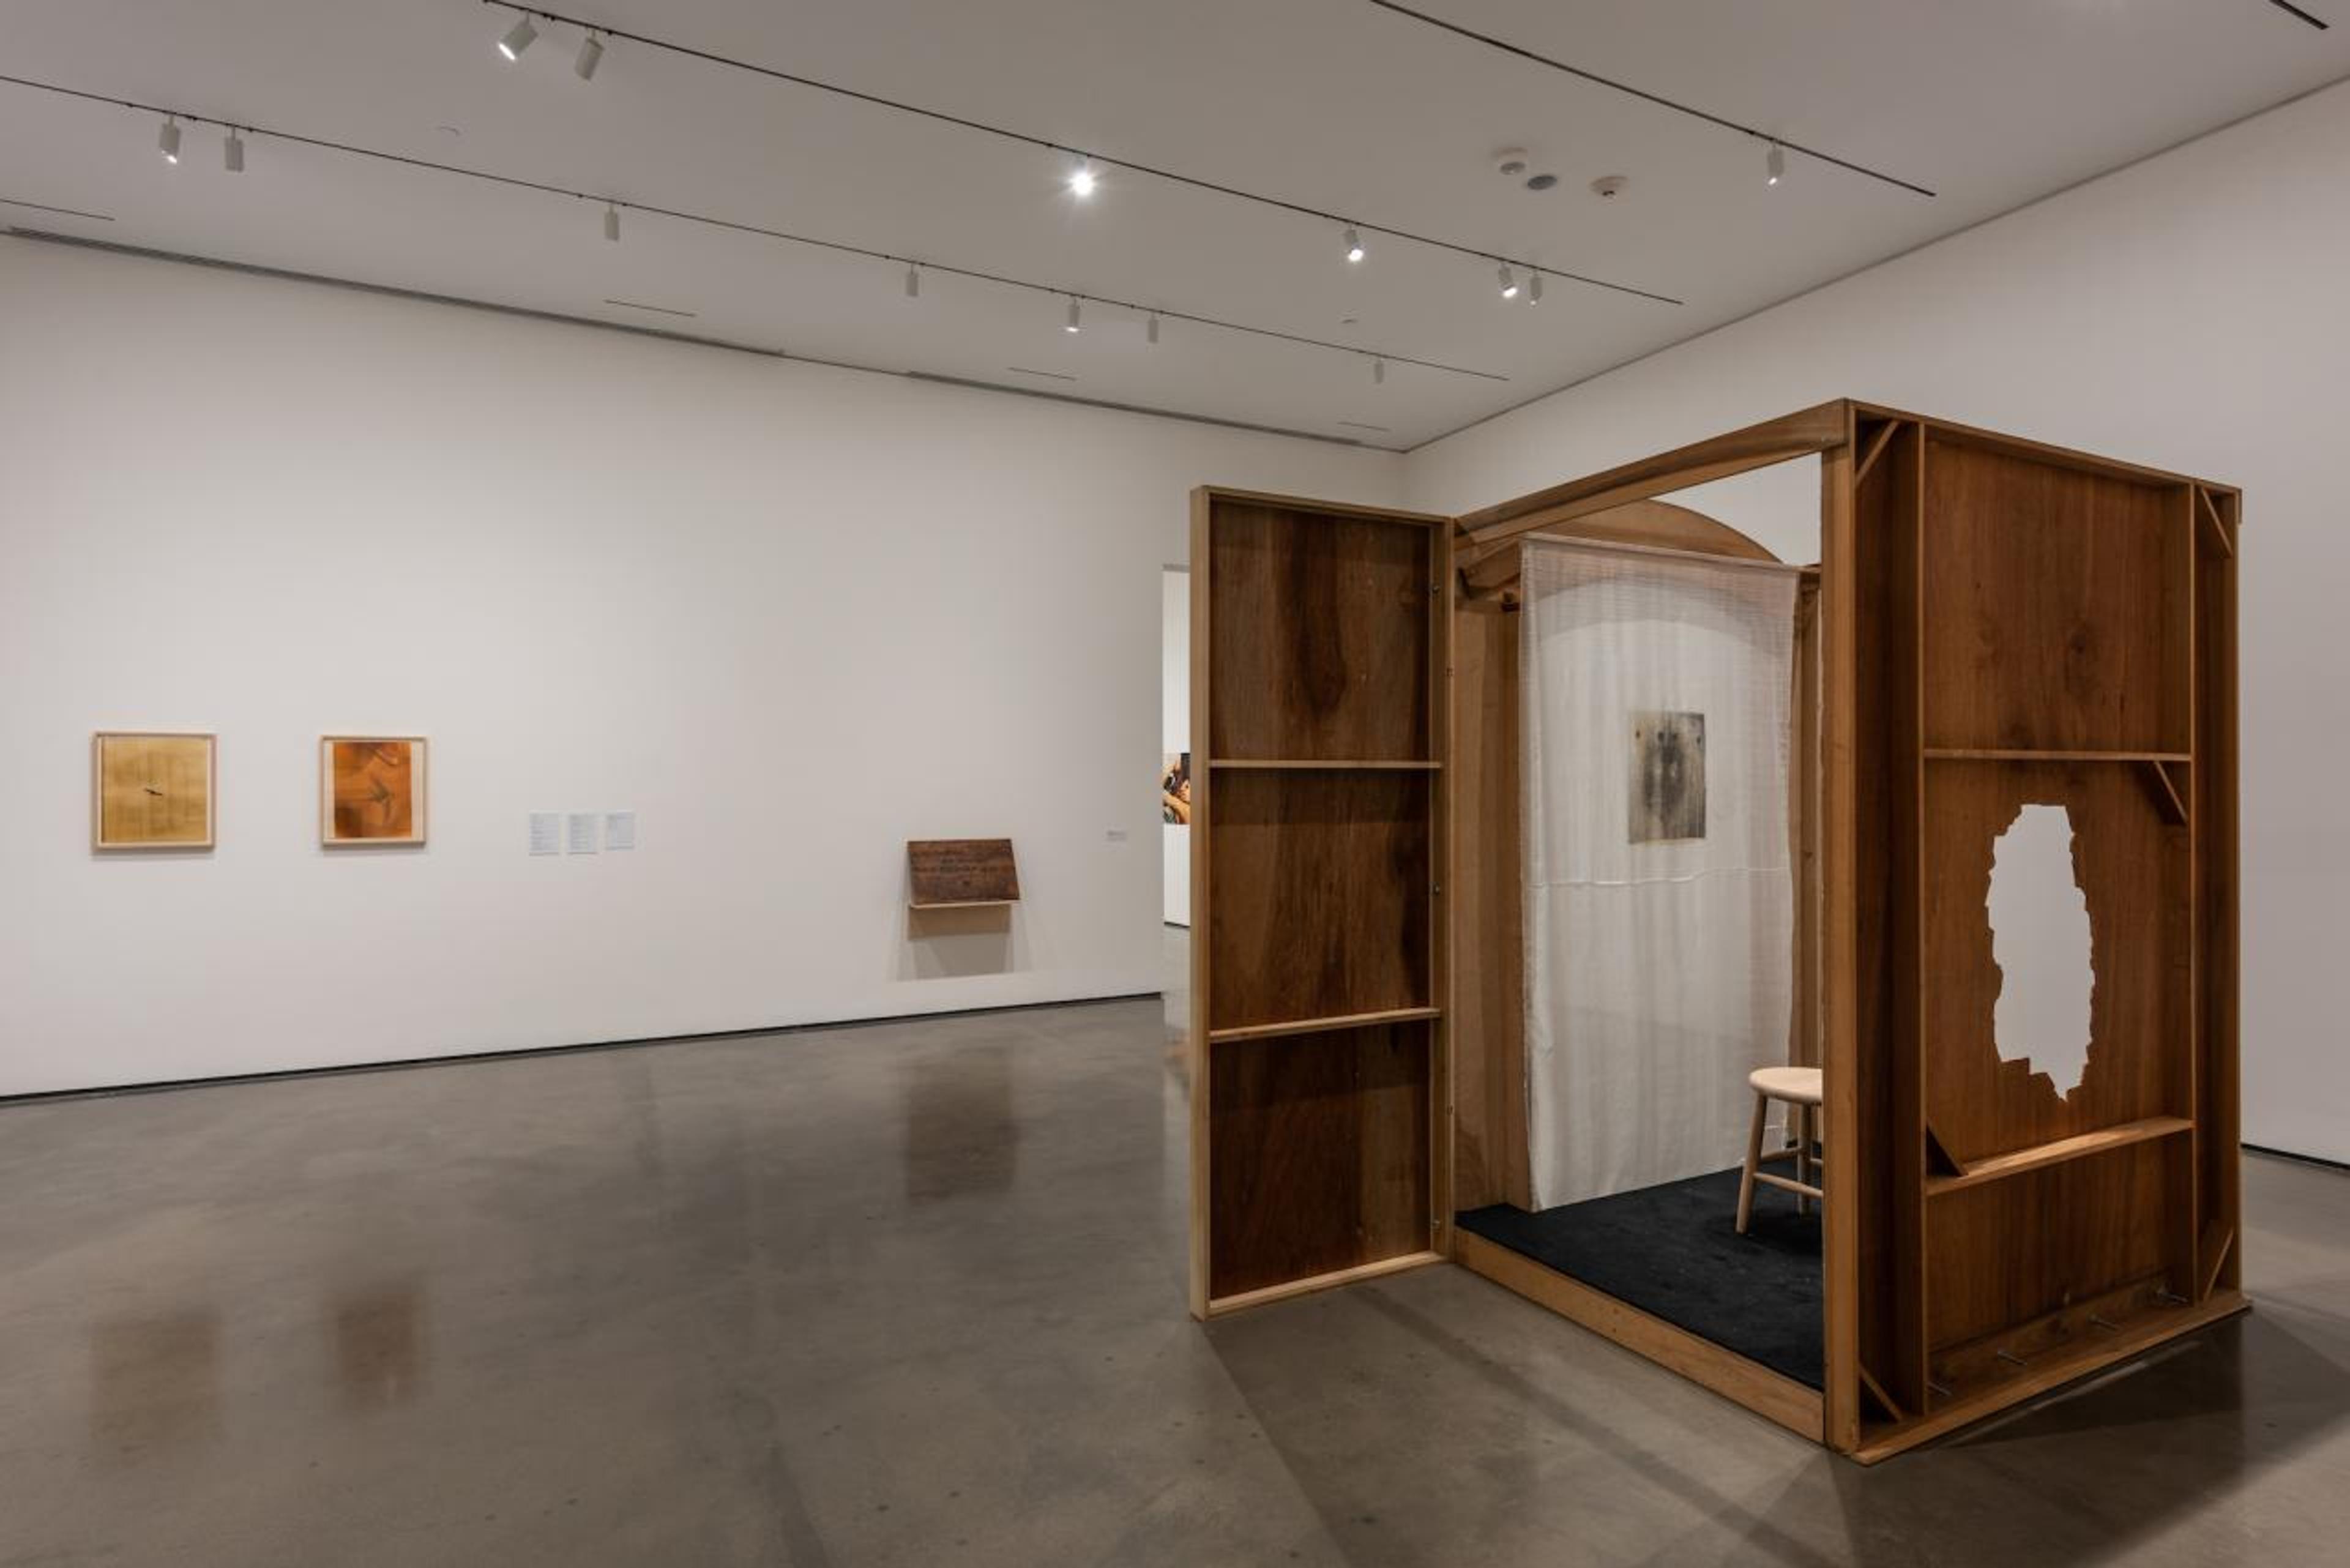 &ldquo;The Conditions of Being Art: Pat Hearn Gallery and American Fine Arts, Co. (1983&ndash;2004)&rdquo;, Hessel Museum of Art , 2018, Exhibition view